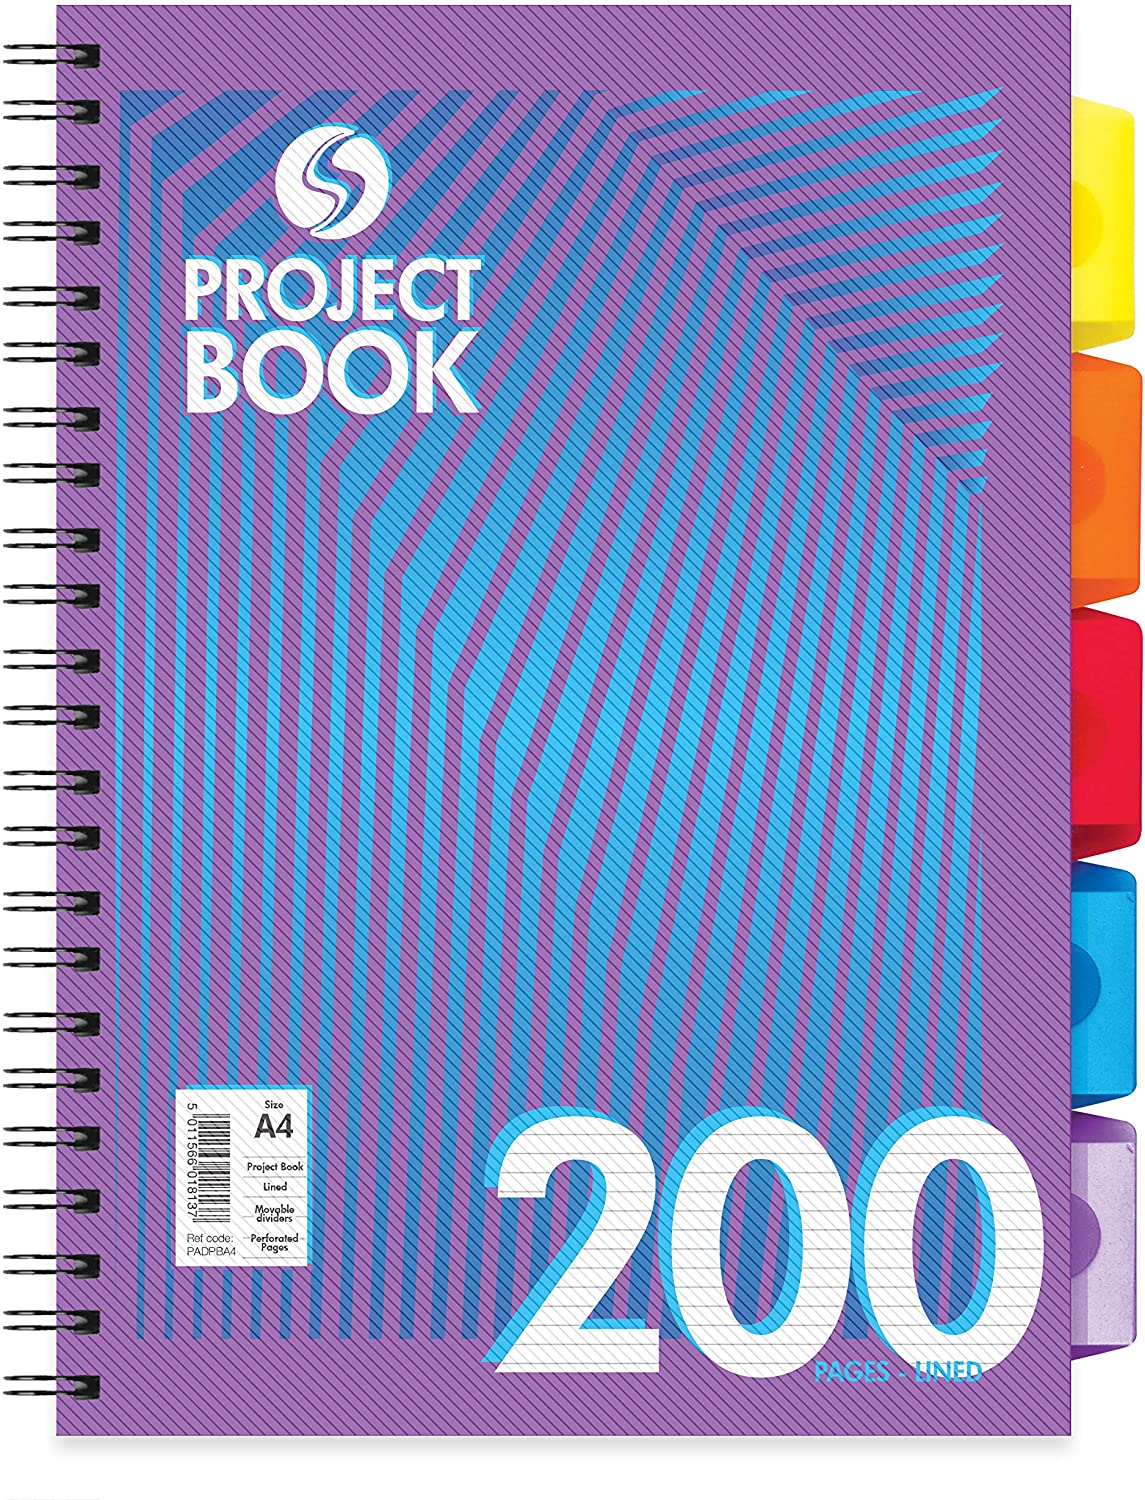 Project Book with dividers